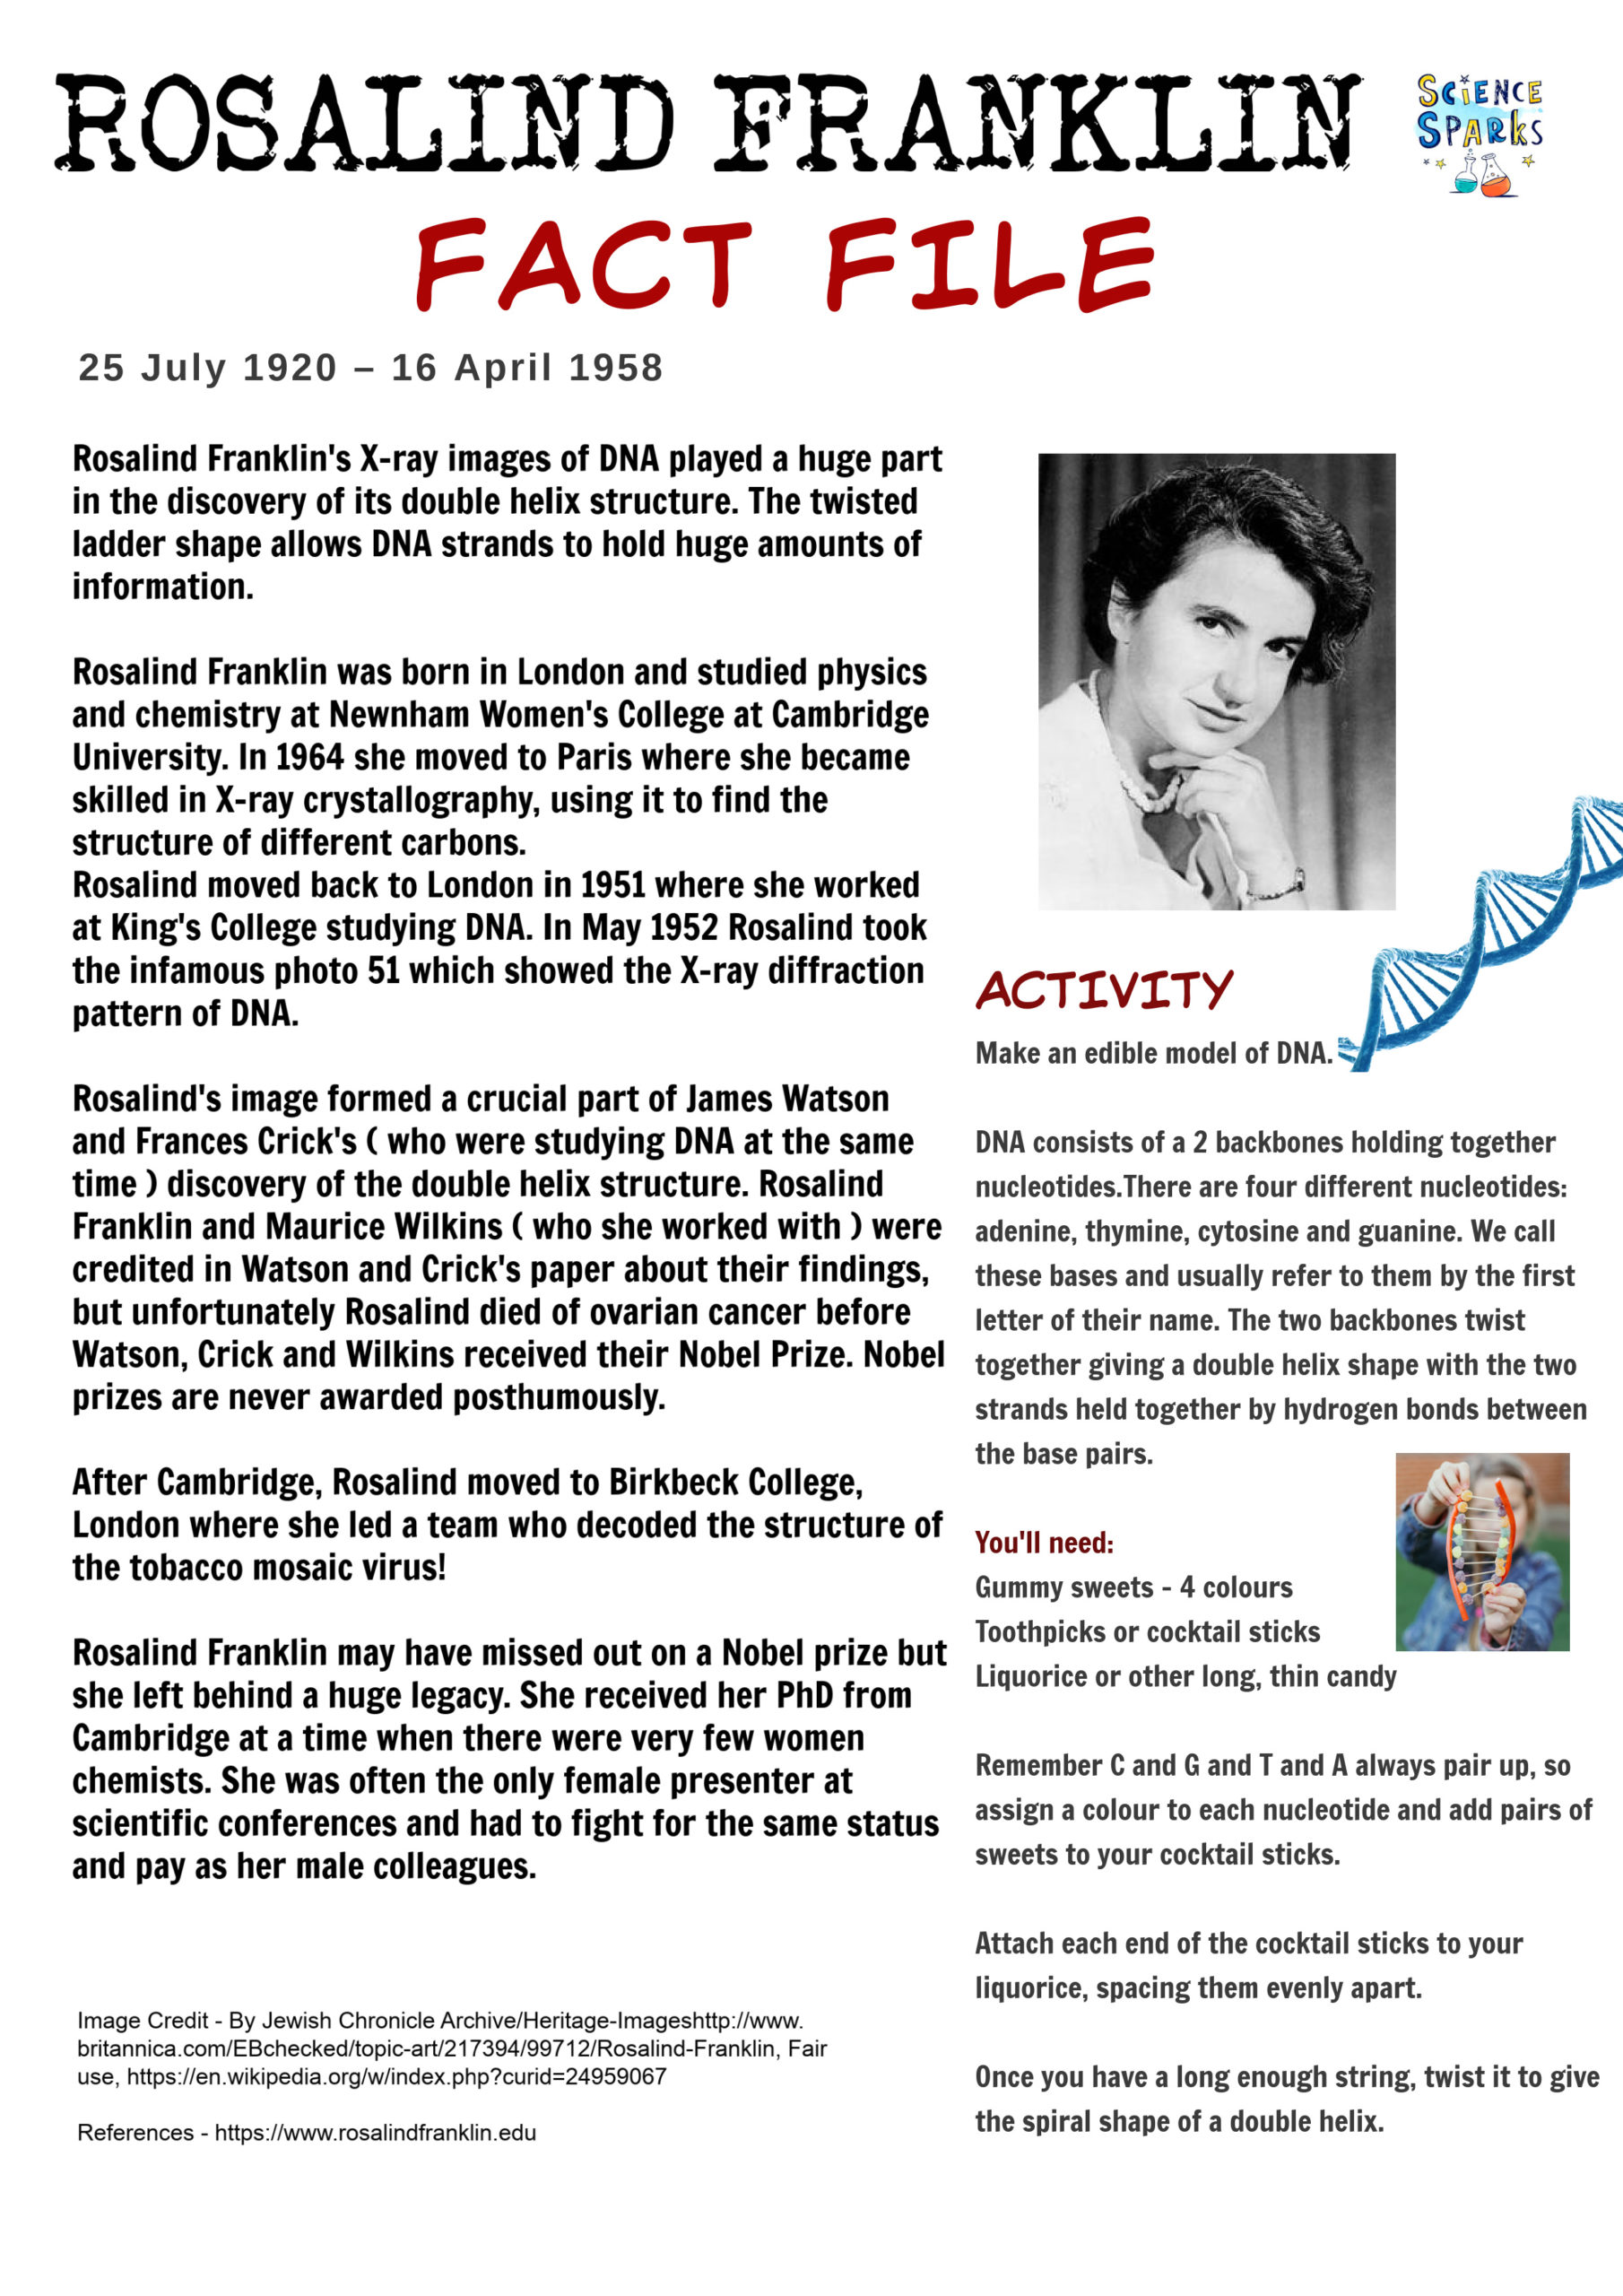 Fact file about Rosalind Franklin